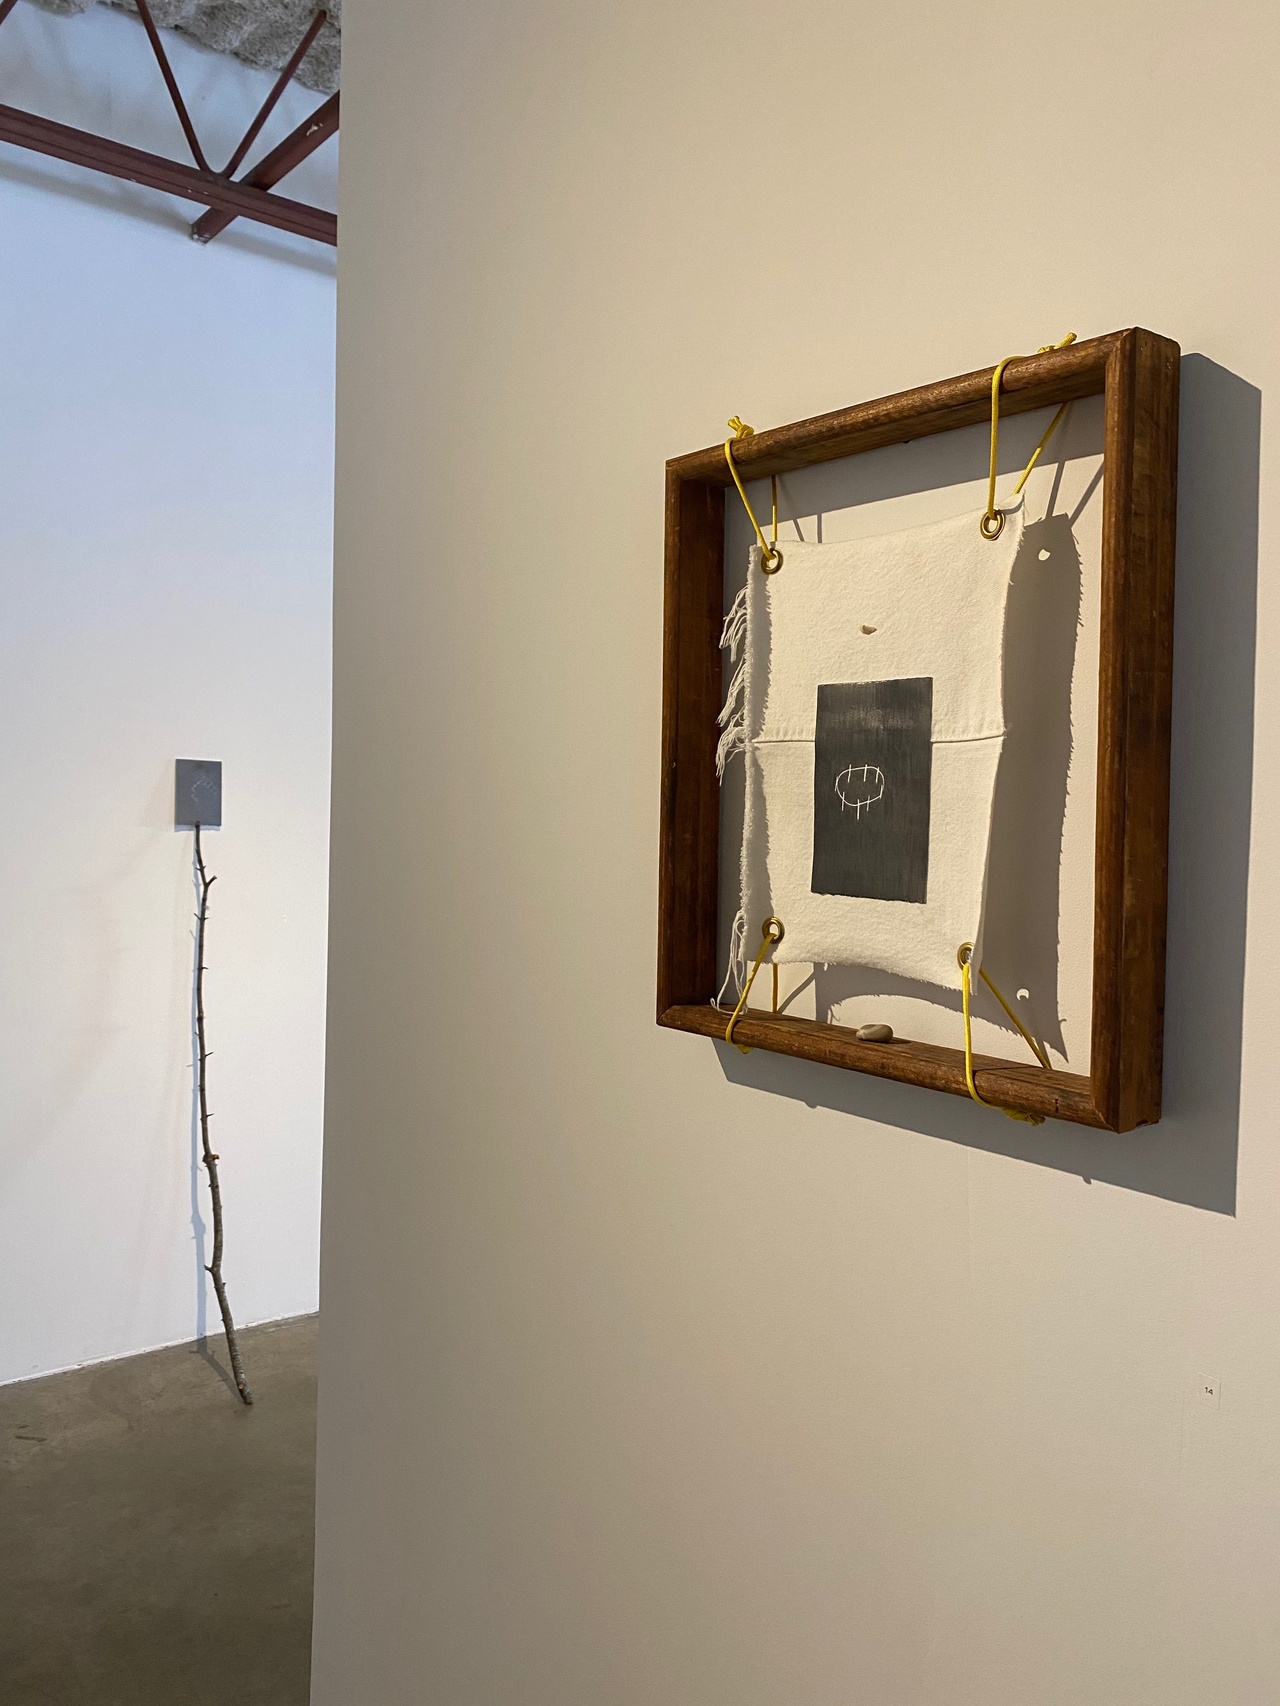 “Justine Kablack: whip-poor-will,” BUOY, Kittery, Maine, 2021, installation view.